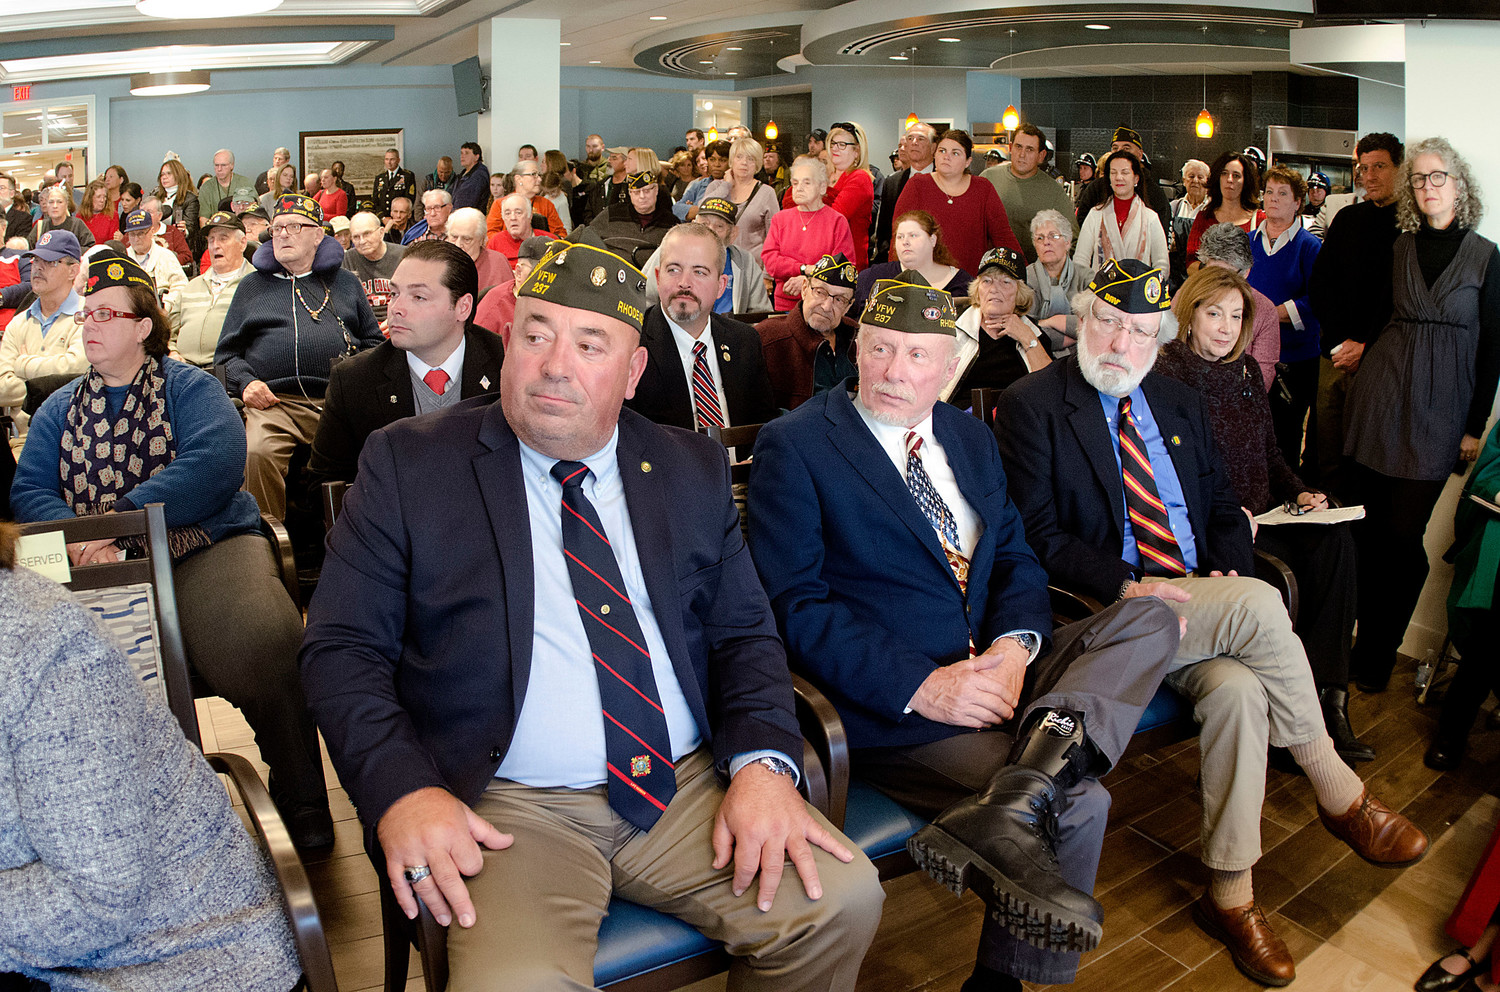 Bristol veterans council members applaud during the ceremony.